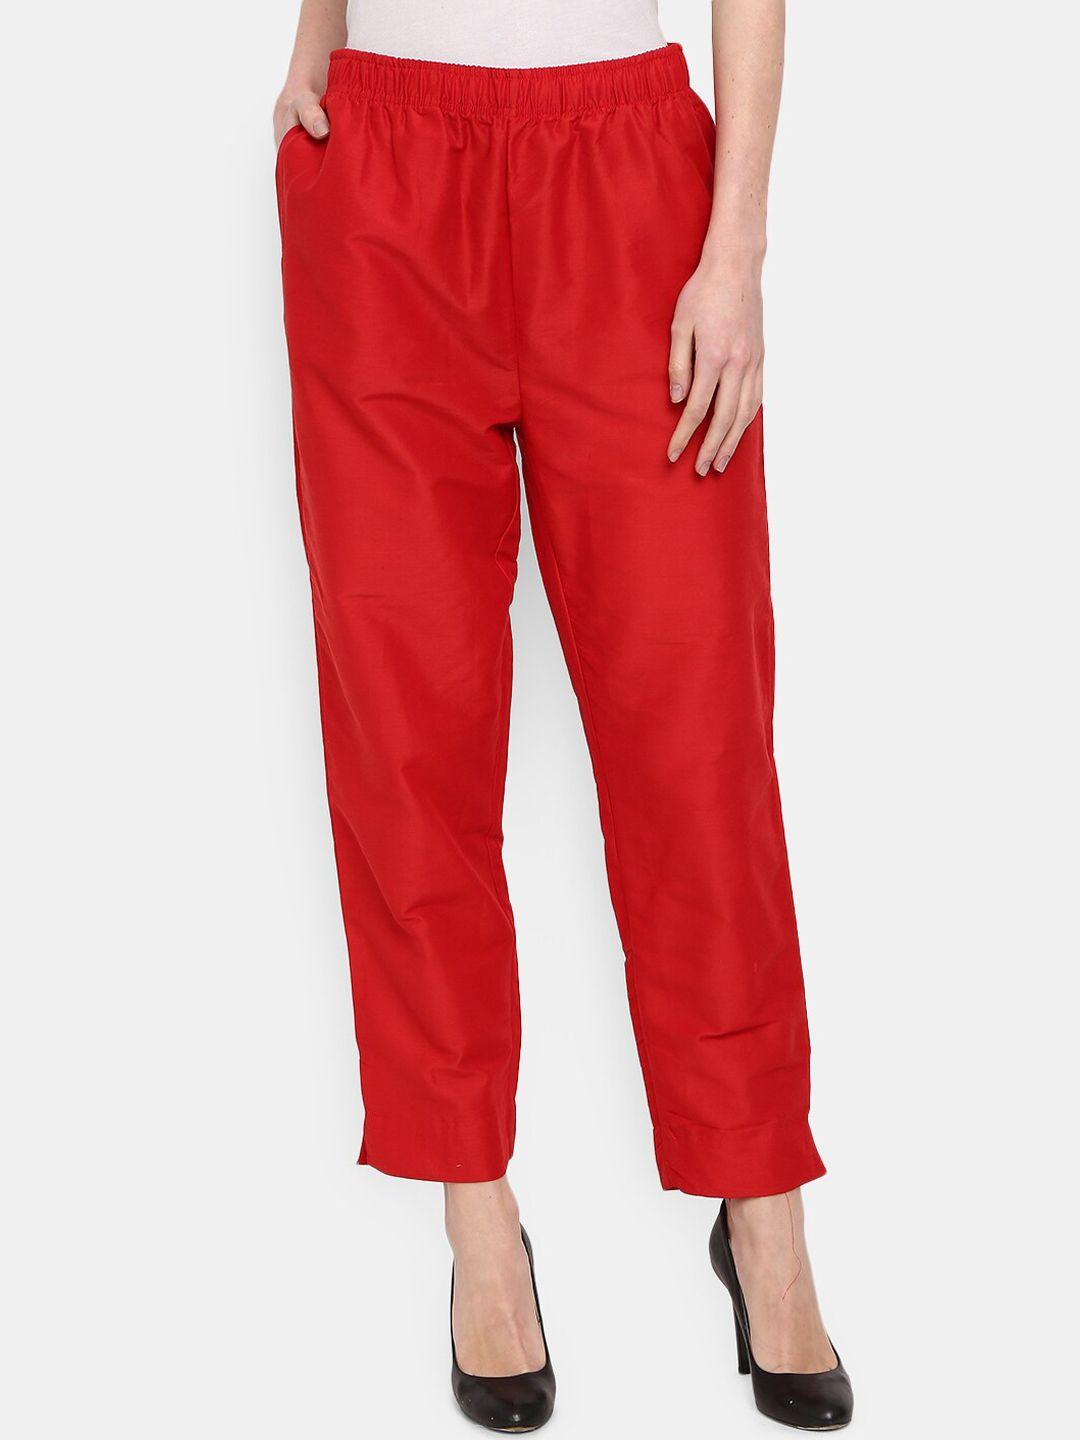 v-mart women red solid classic trousers